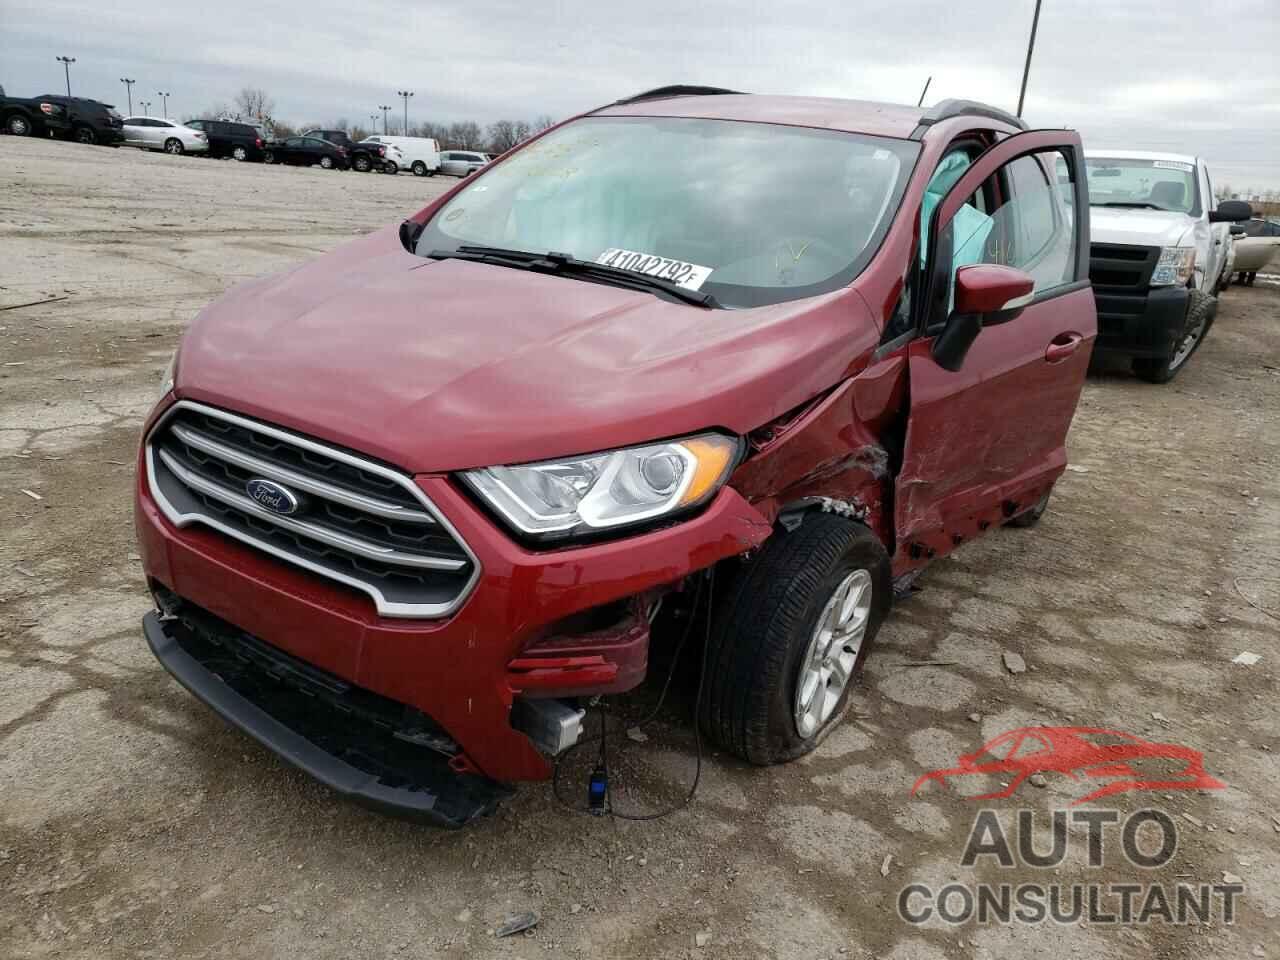 FORD ALL OTHER 2021 - MAJ3S2GE0MC438628